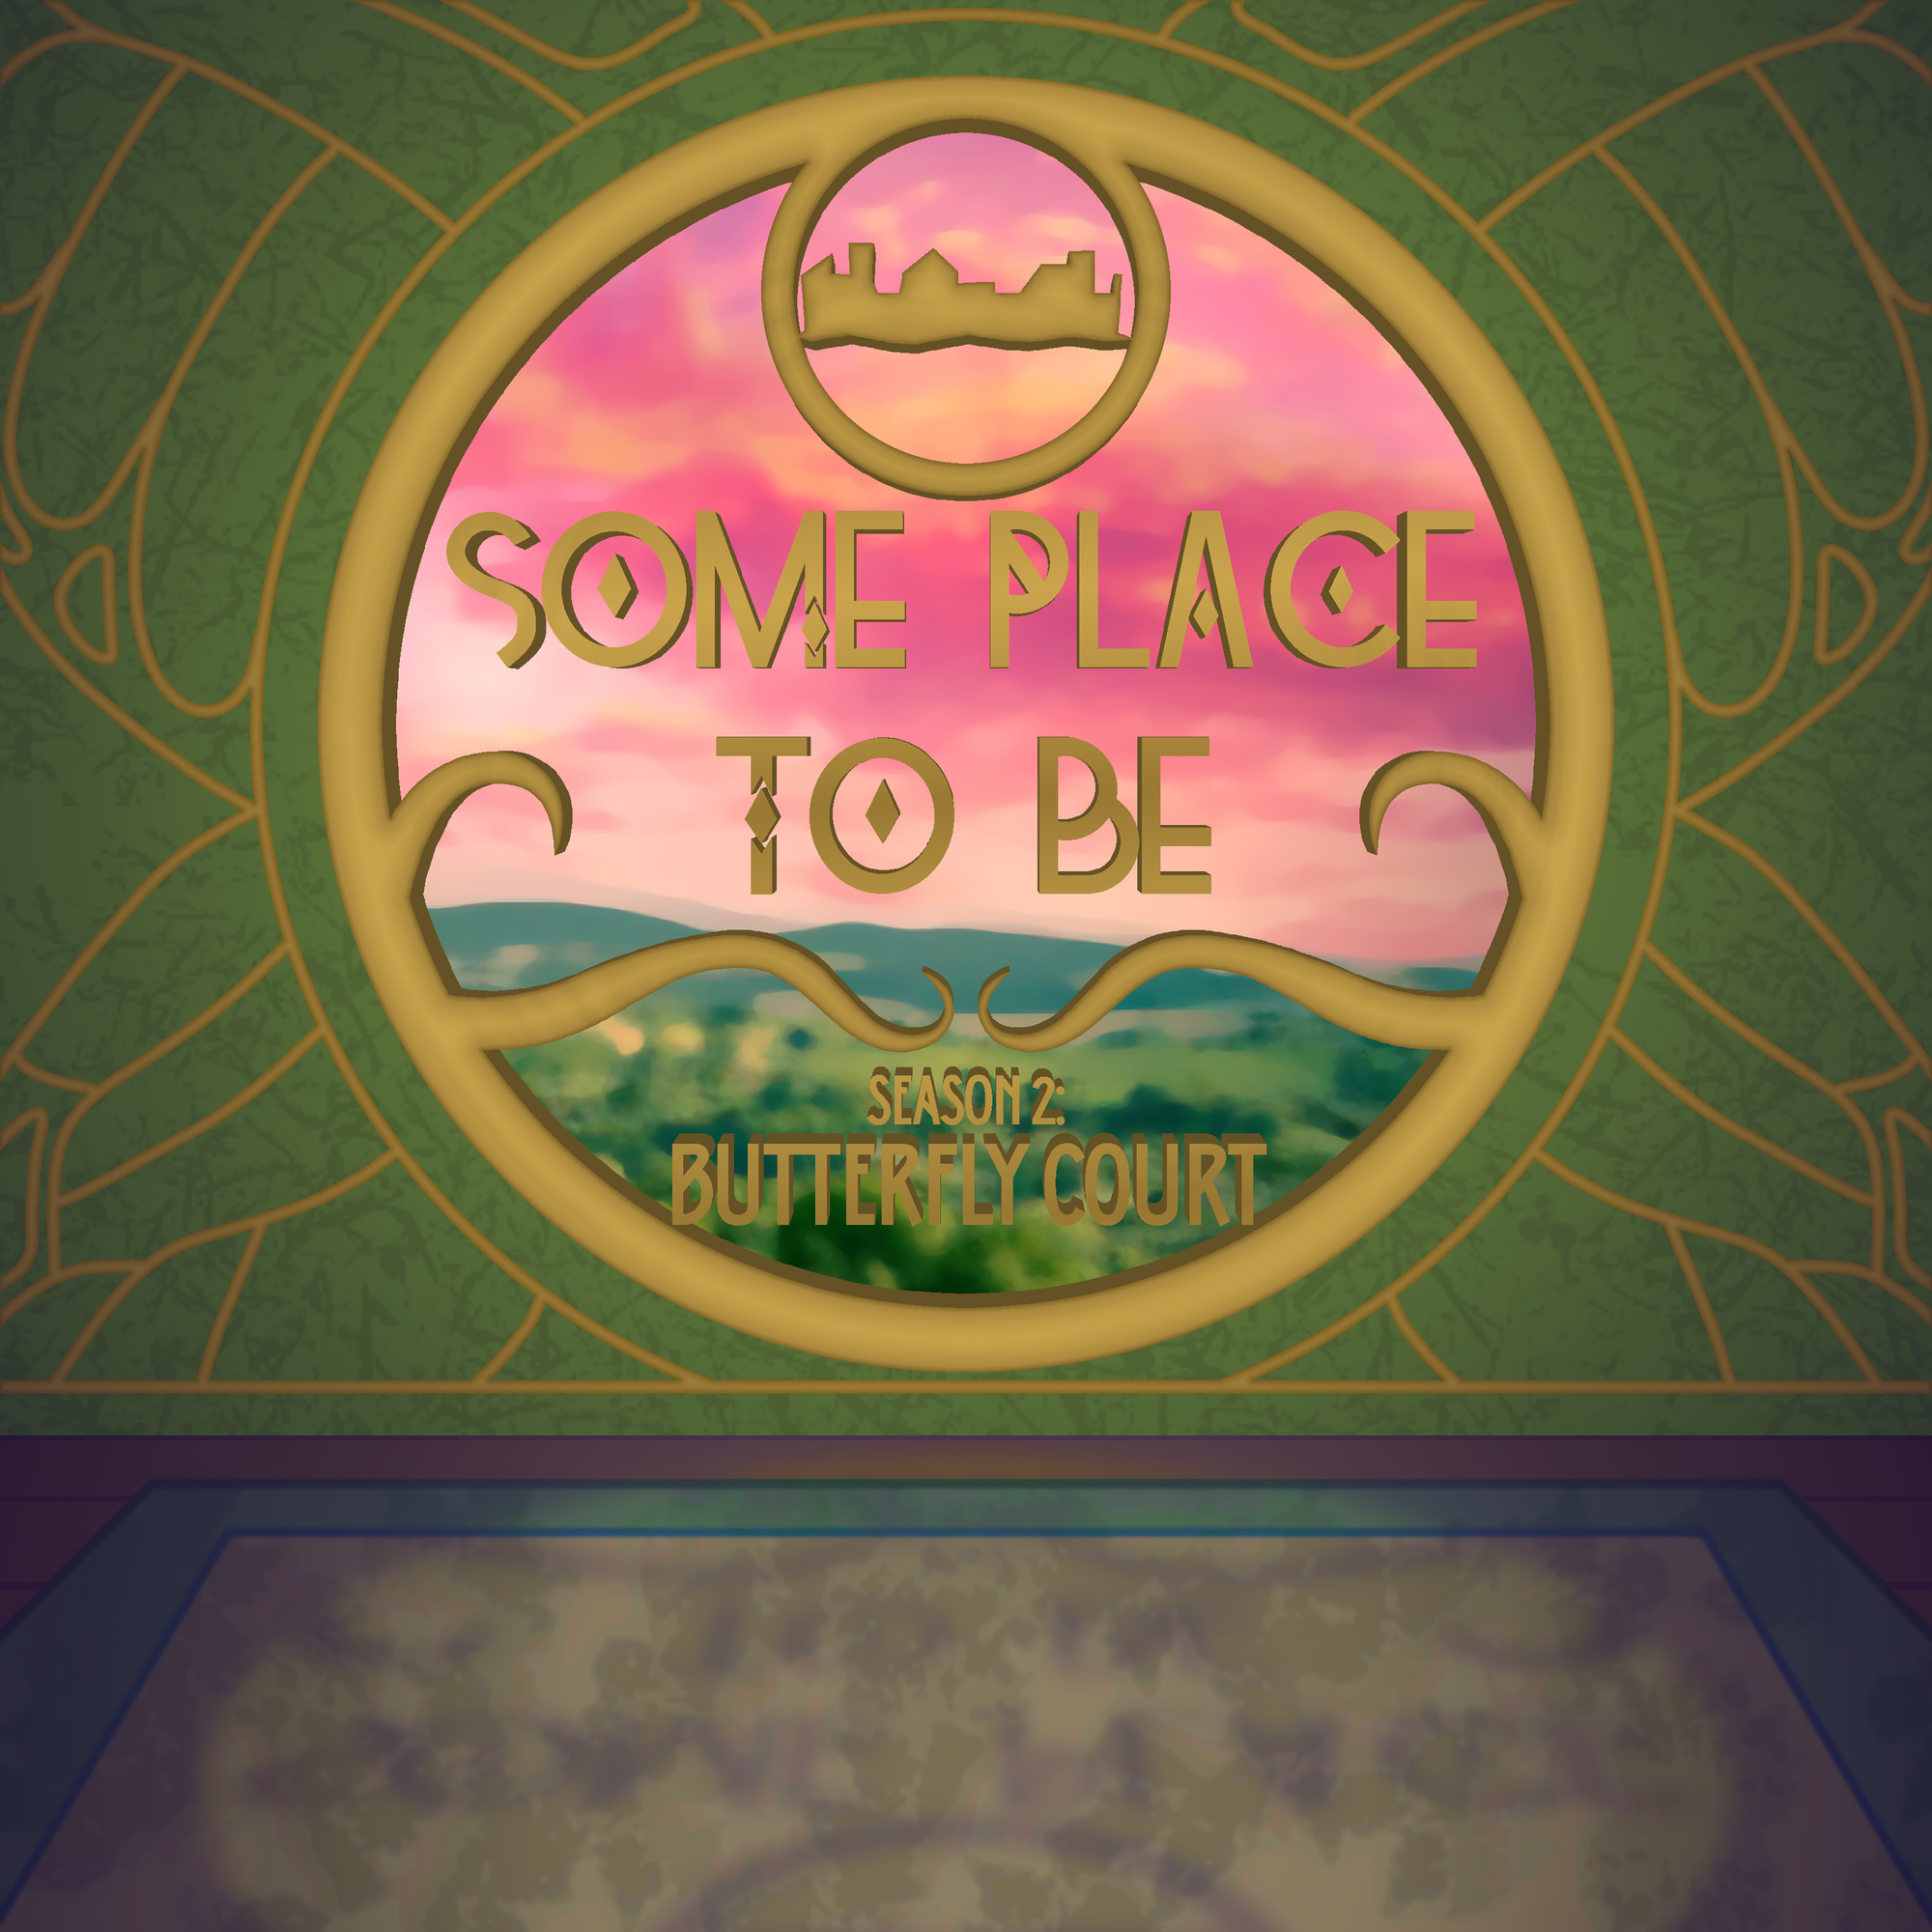 An ornate window overseeing a pink hued sky and green landscape. There is text on the window that reads Some Place to Be Season 2: Butterfly Court. The window is on a green wall with gold decals reminiscent of large butterfly wings.